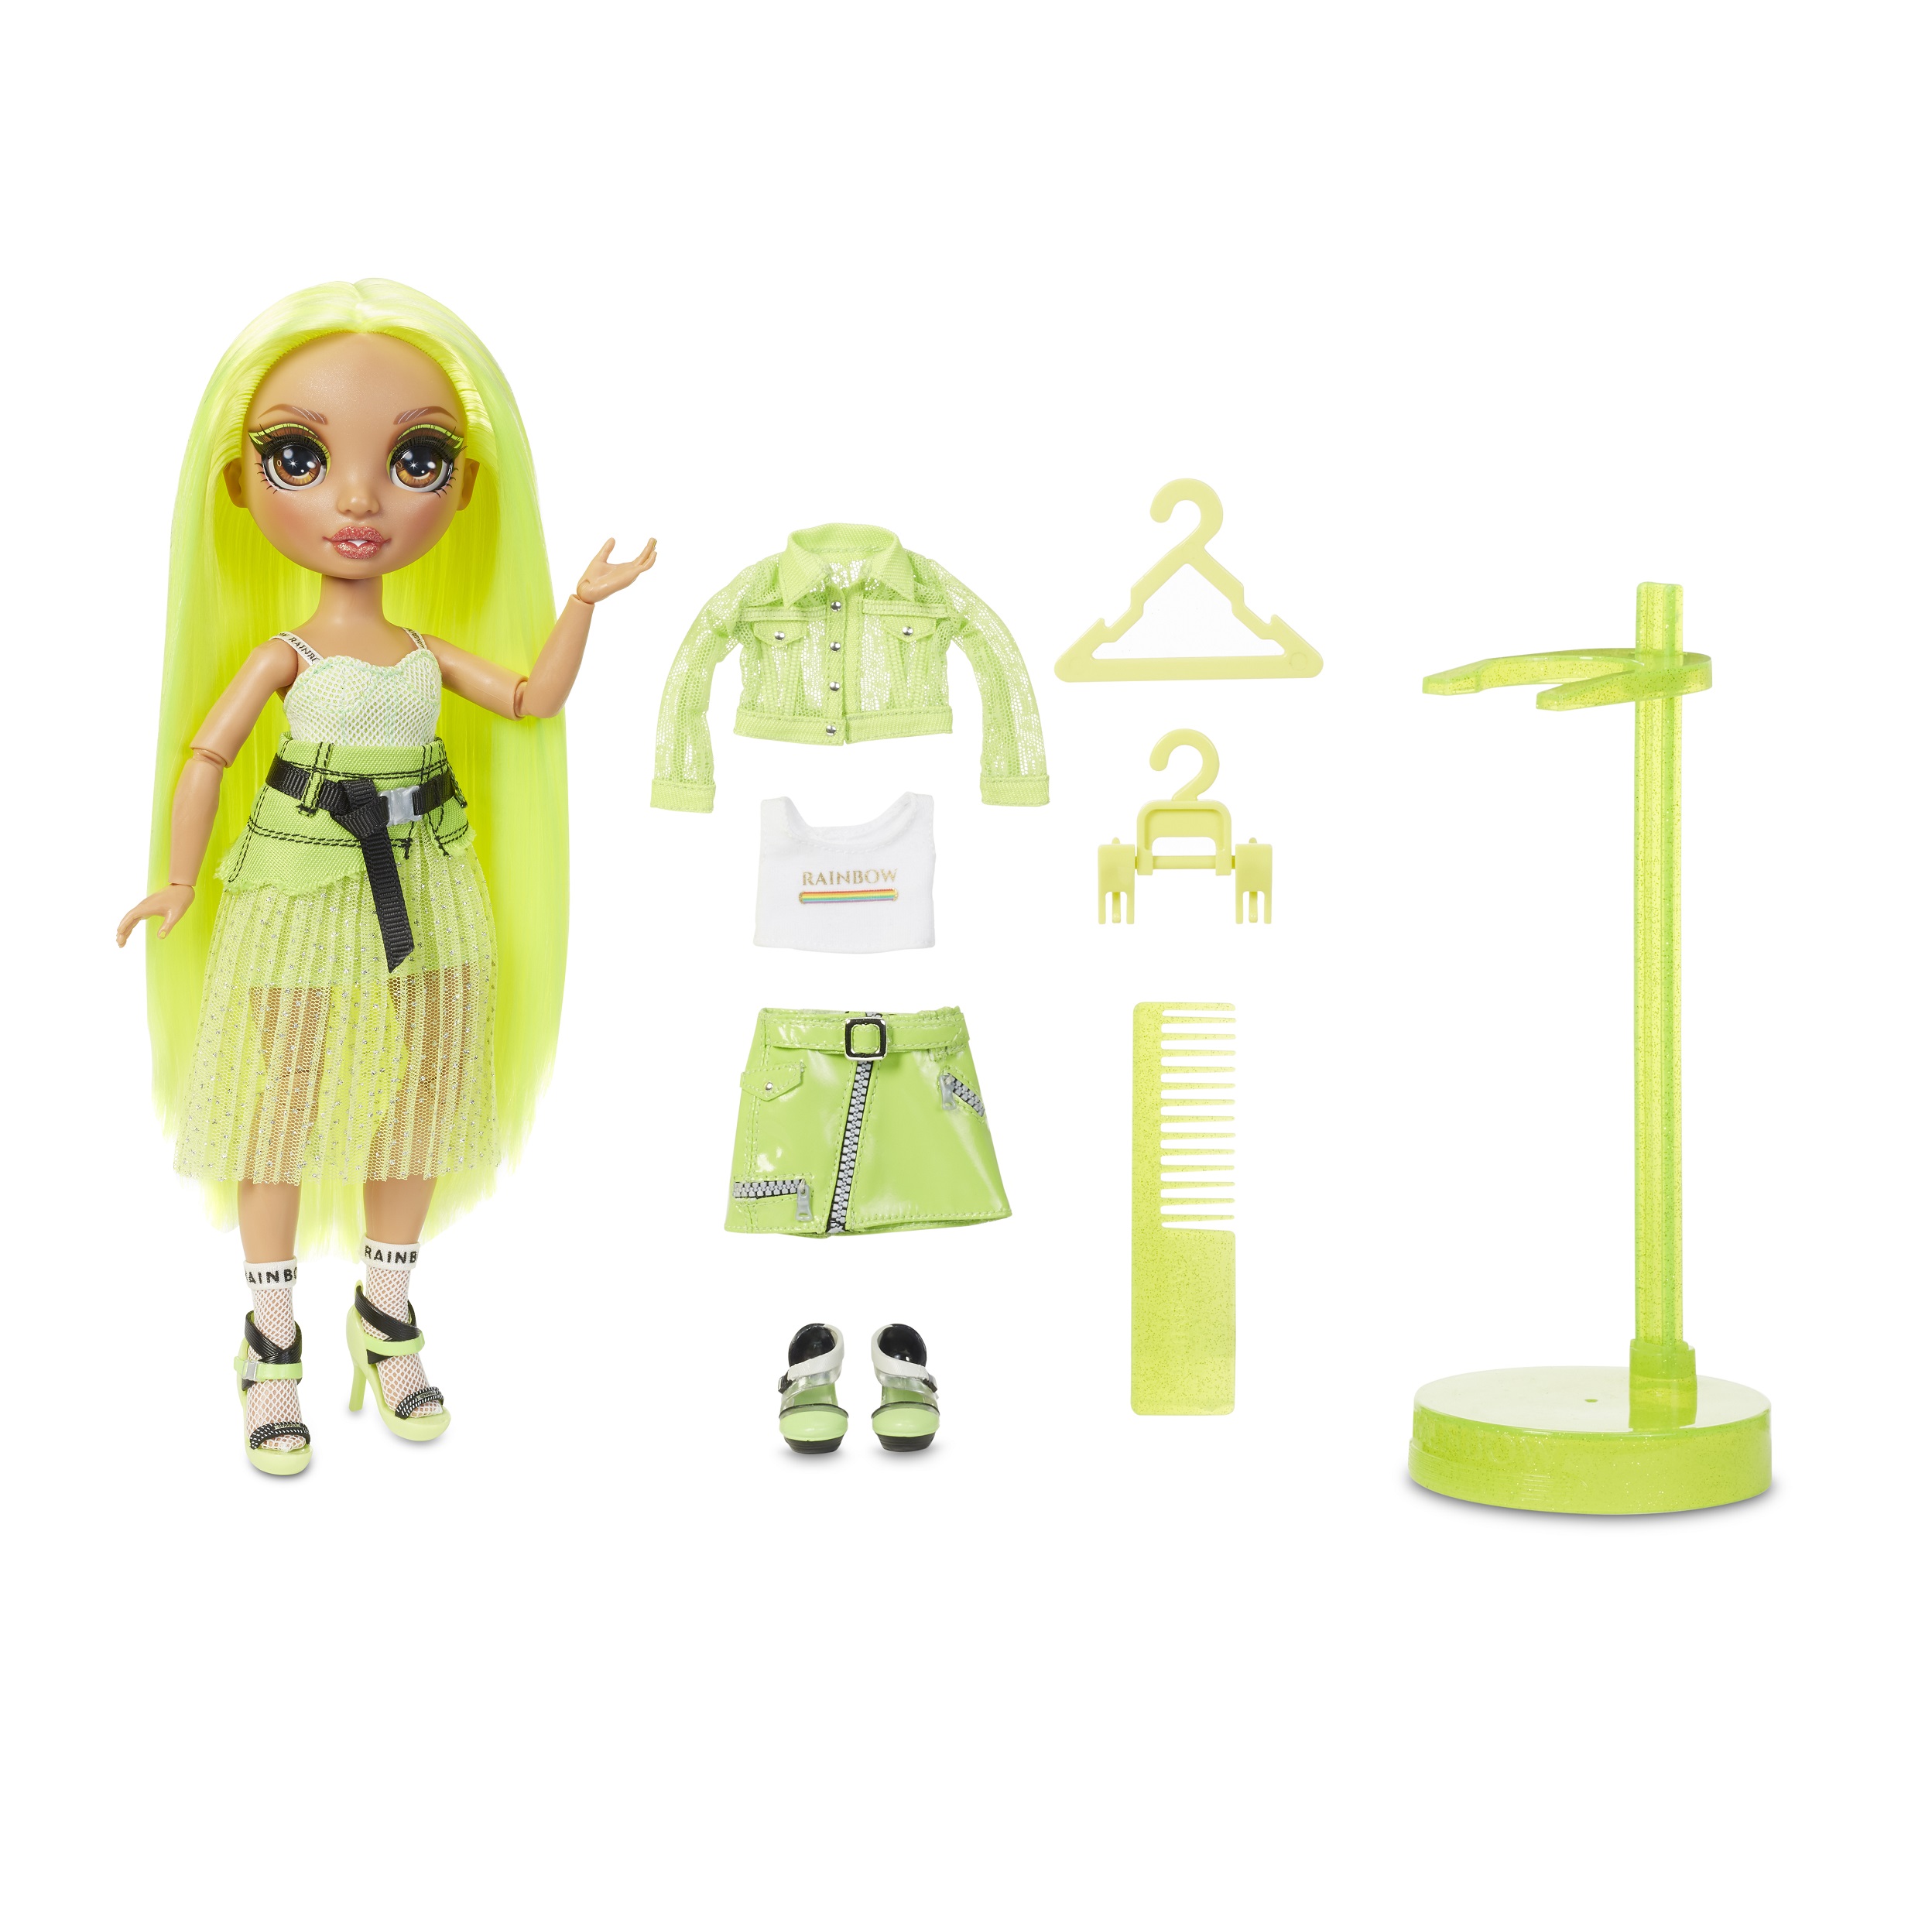 Rainbow High Karma Nichols – Neon Green Fashion Doll with 2 Complete Mix & Match Outfits and Accessories, Toys for Kids 6-12 Years Old - image 4 of 9